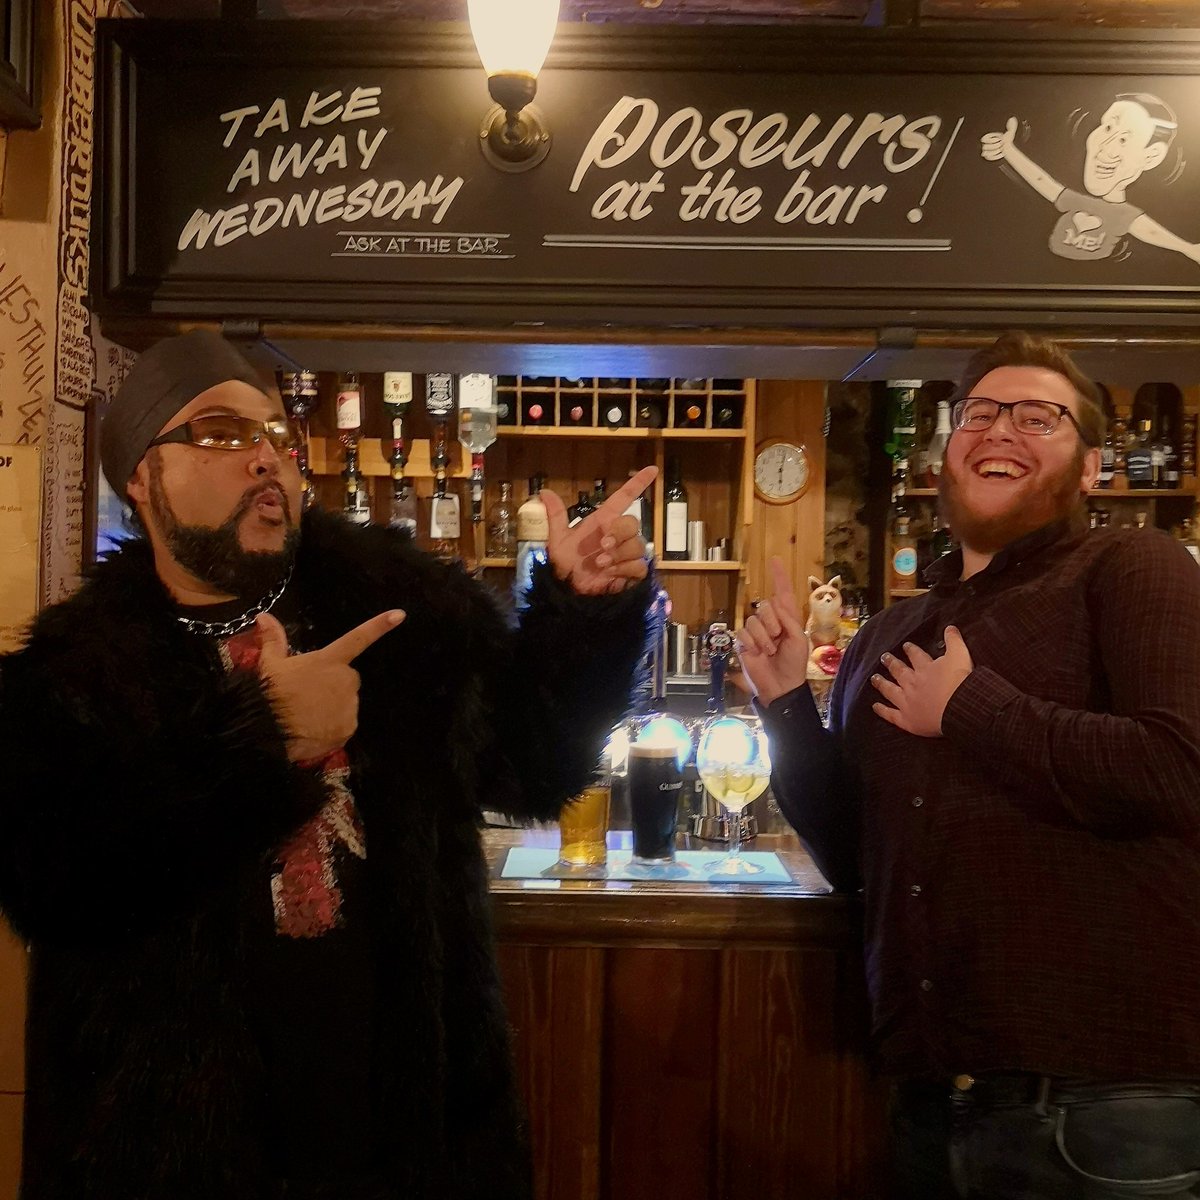 What #fabulous #poseursatthebar @AmrickChanna & @jakeyroopey made yesterday in between takes with @NineLivesMedia whilst  filming in the @WhiteHorseDover for an upcoming terrestrial #TV  #show @destdover @EiGroupplc @Kent_Online @VisitKent @kentlivenews @doverexpress #Dover #kent